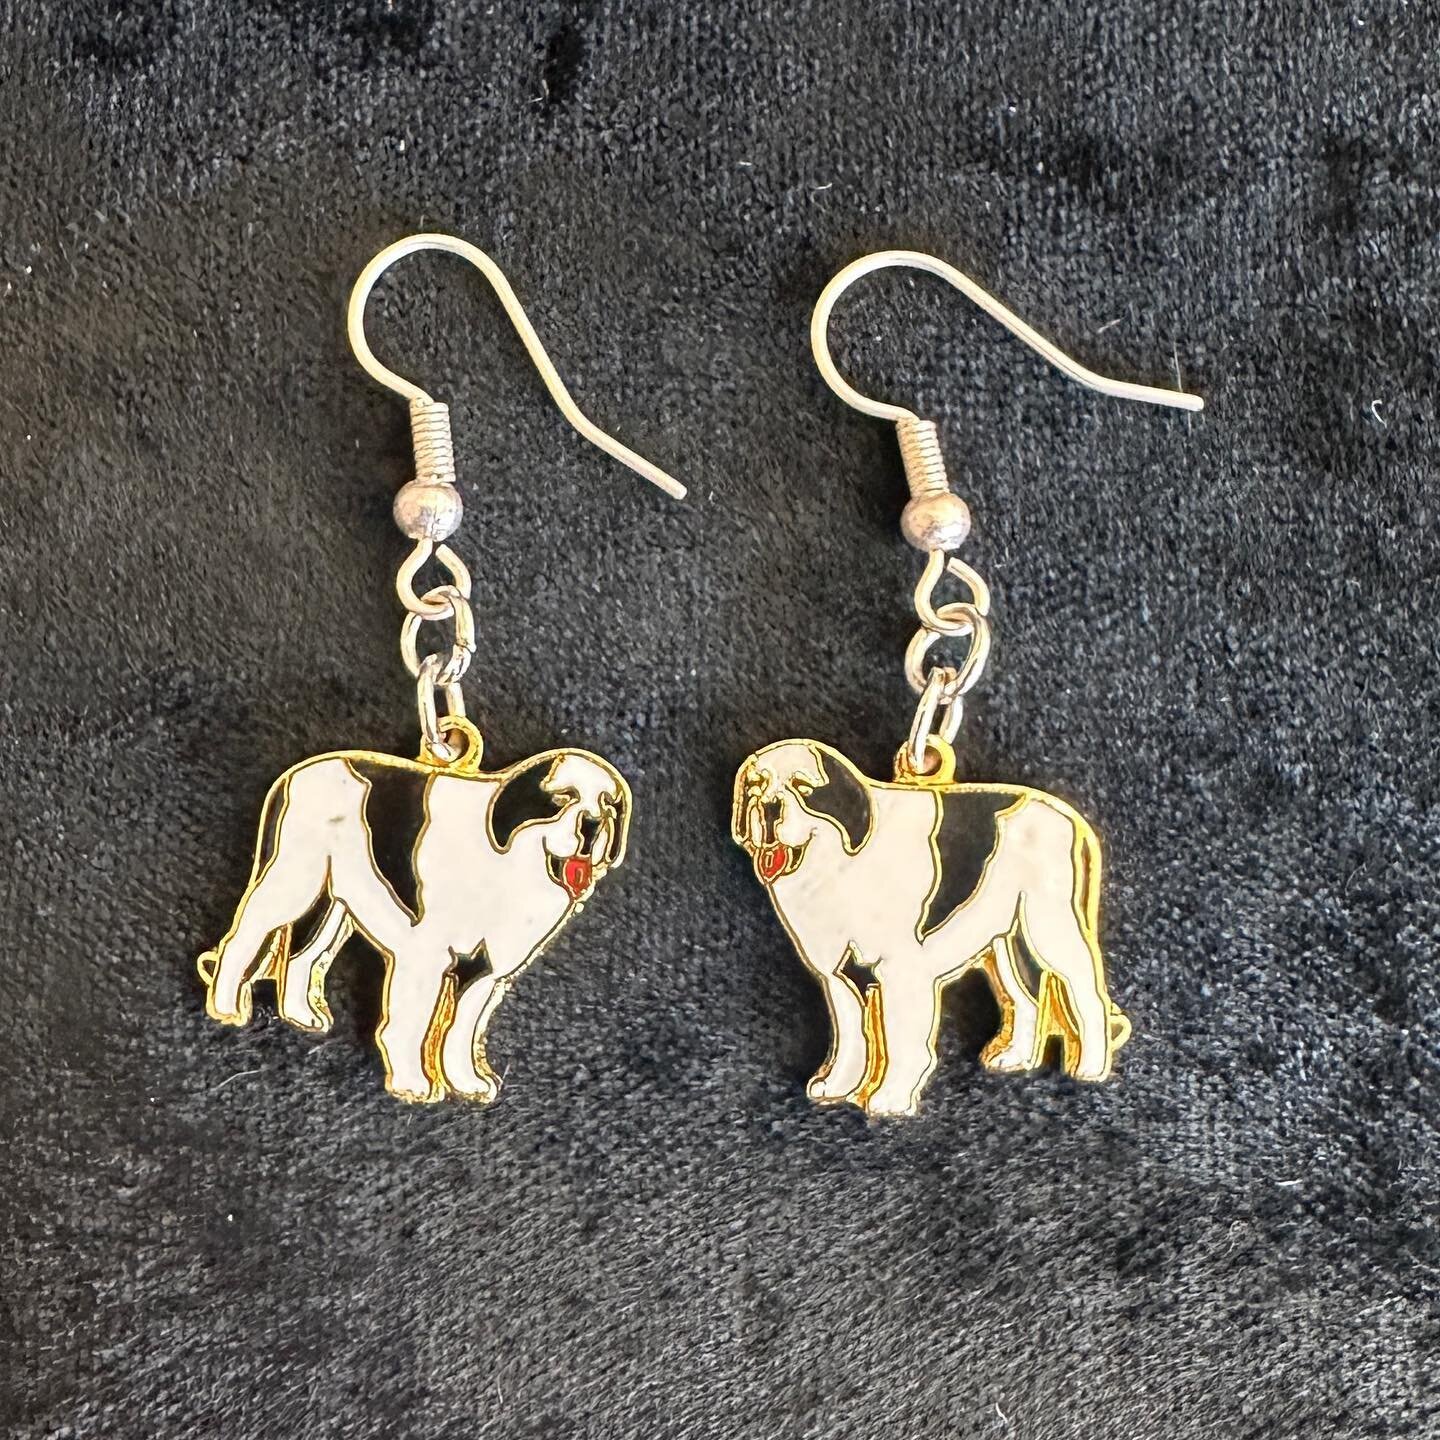 Just so you know, Big Dog earrings exist. And we have them. 🦴✨